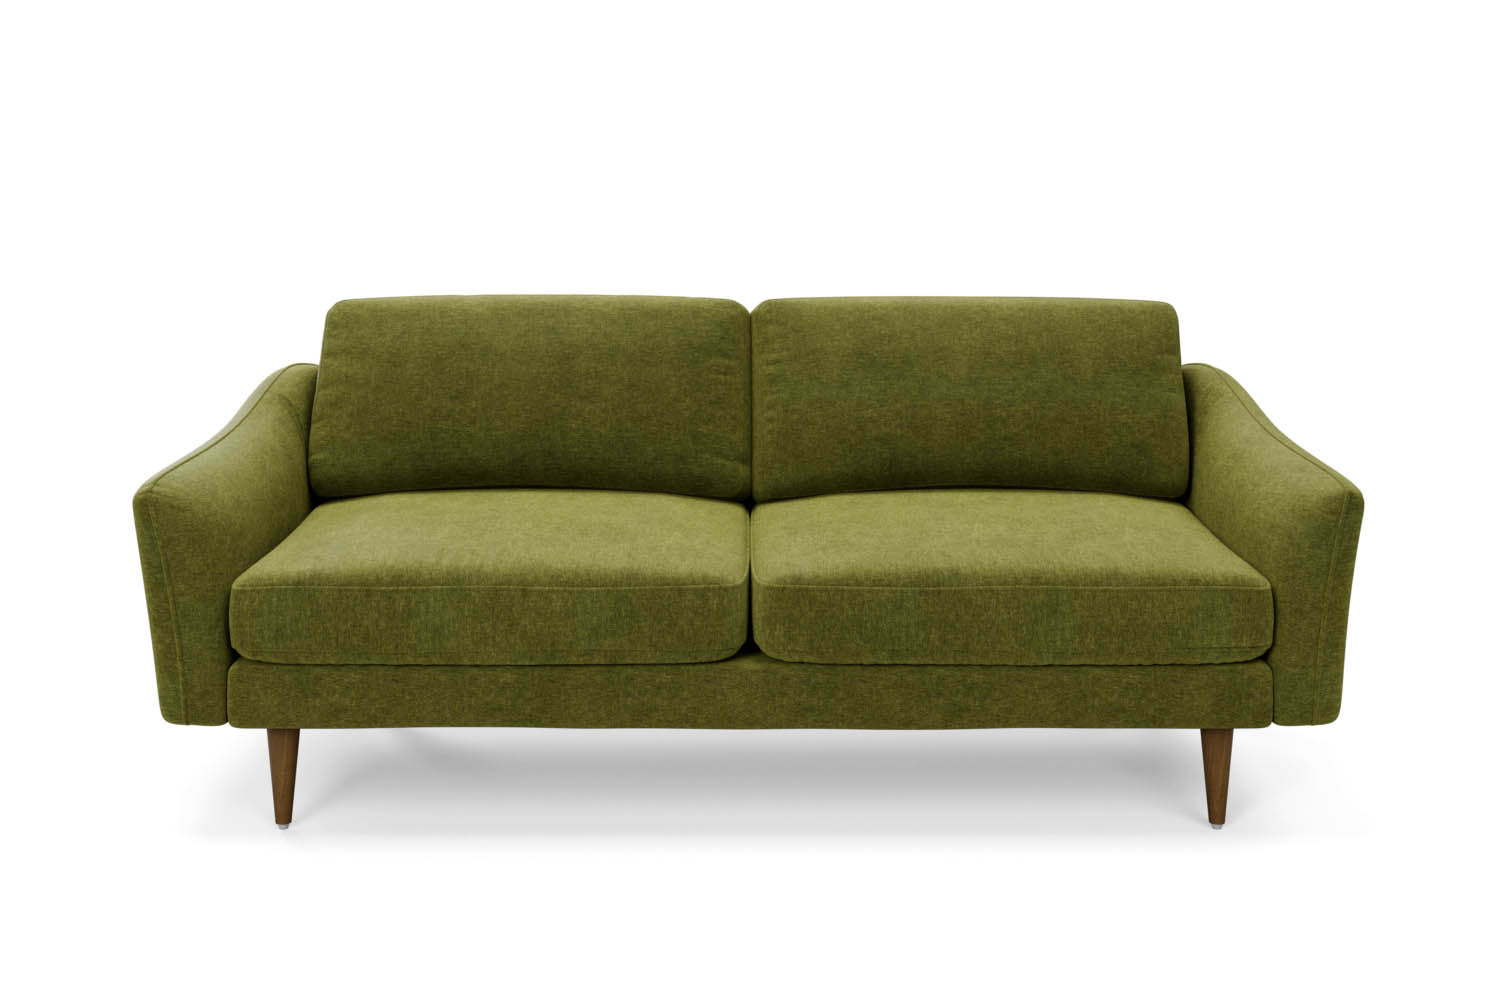 The Rebel 3 Seater Sofa in Moss with brown legs front variant_40886299721776